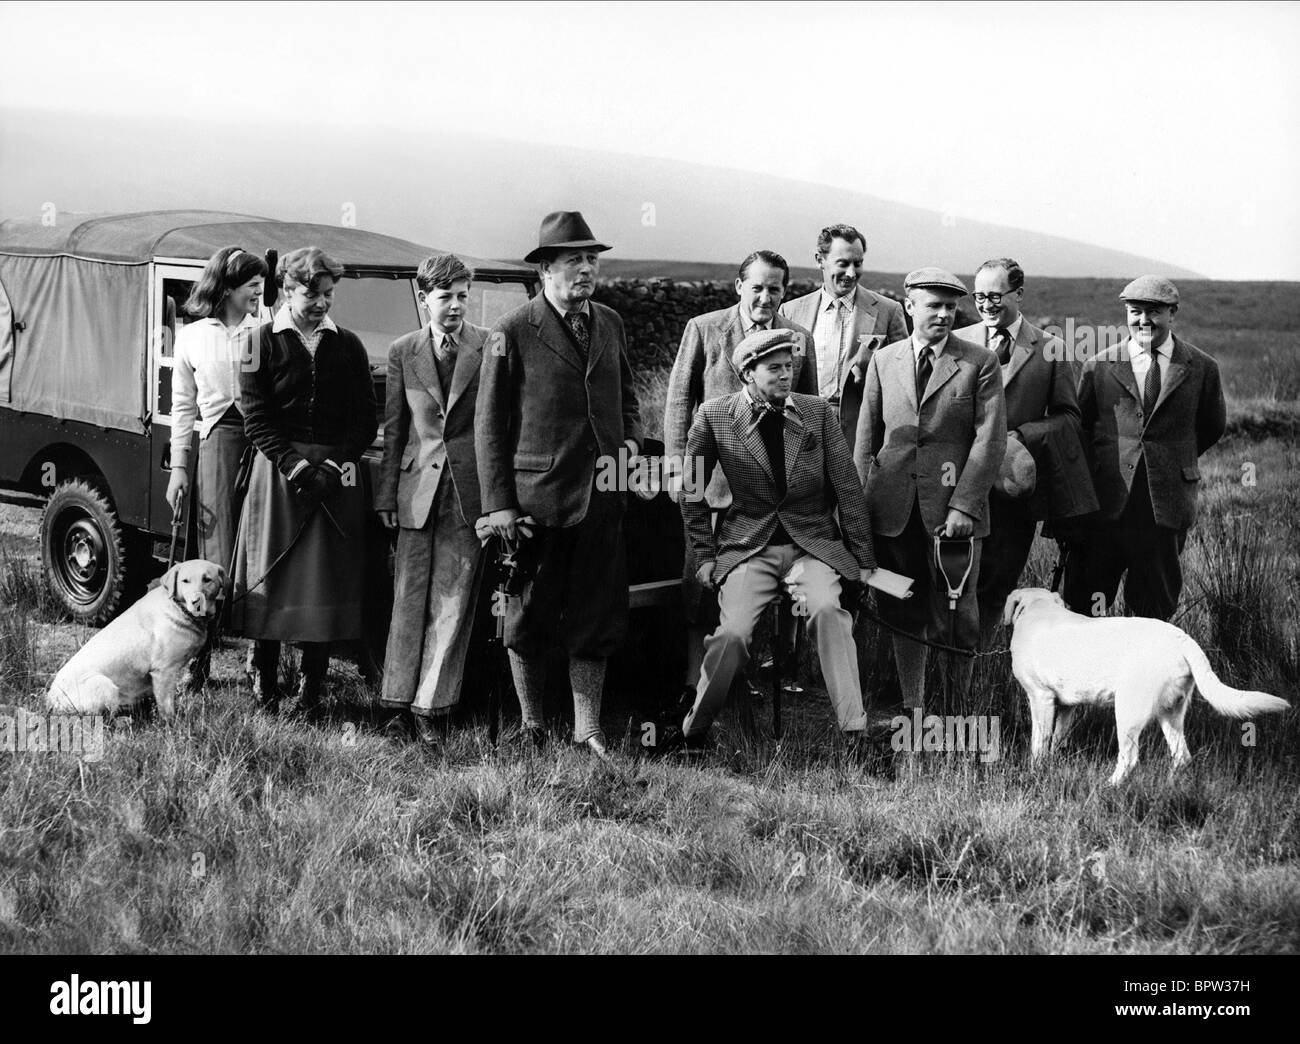 Lord granville Black and White Stock Photos & Images - Alamy